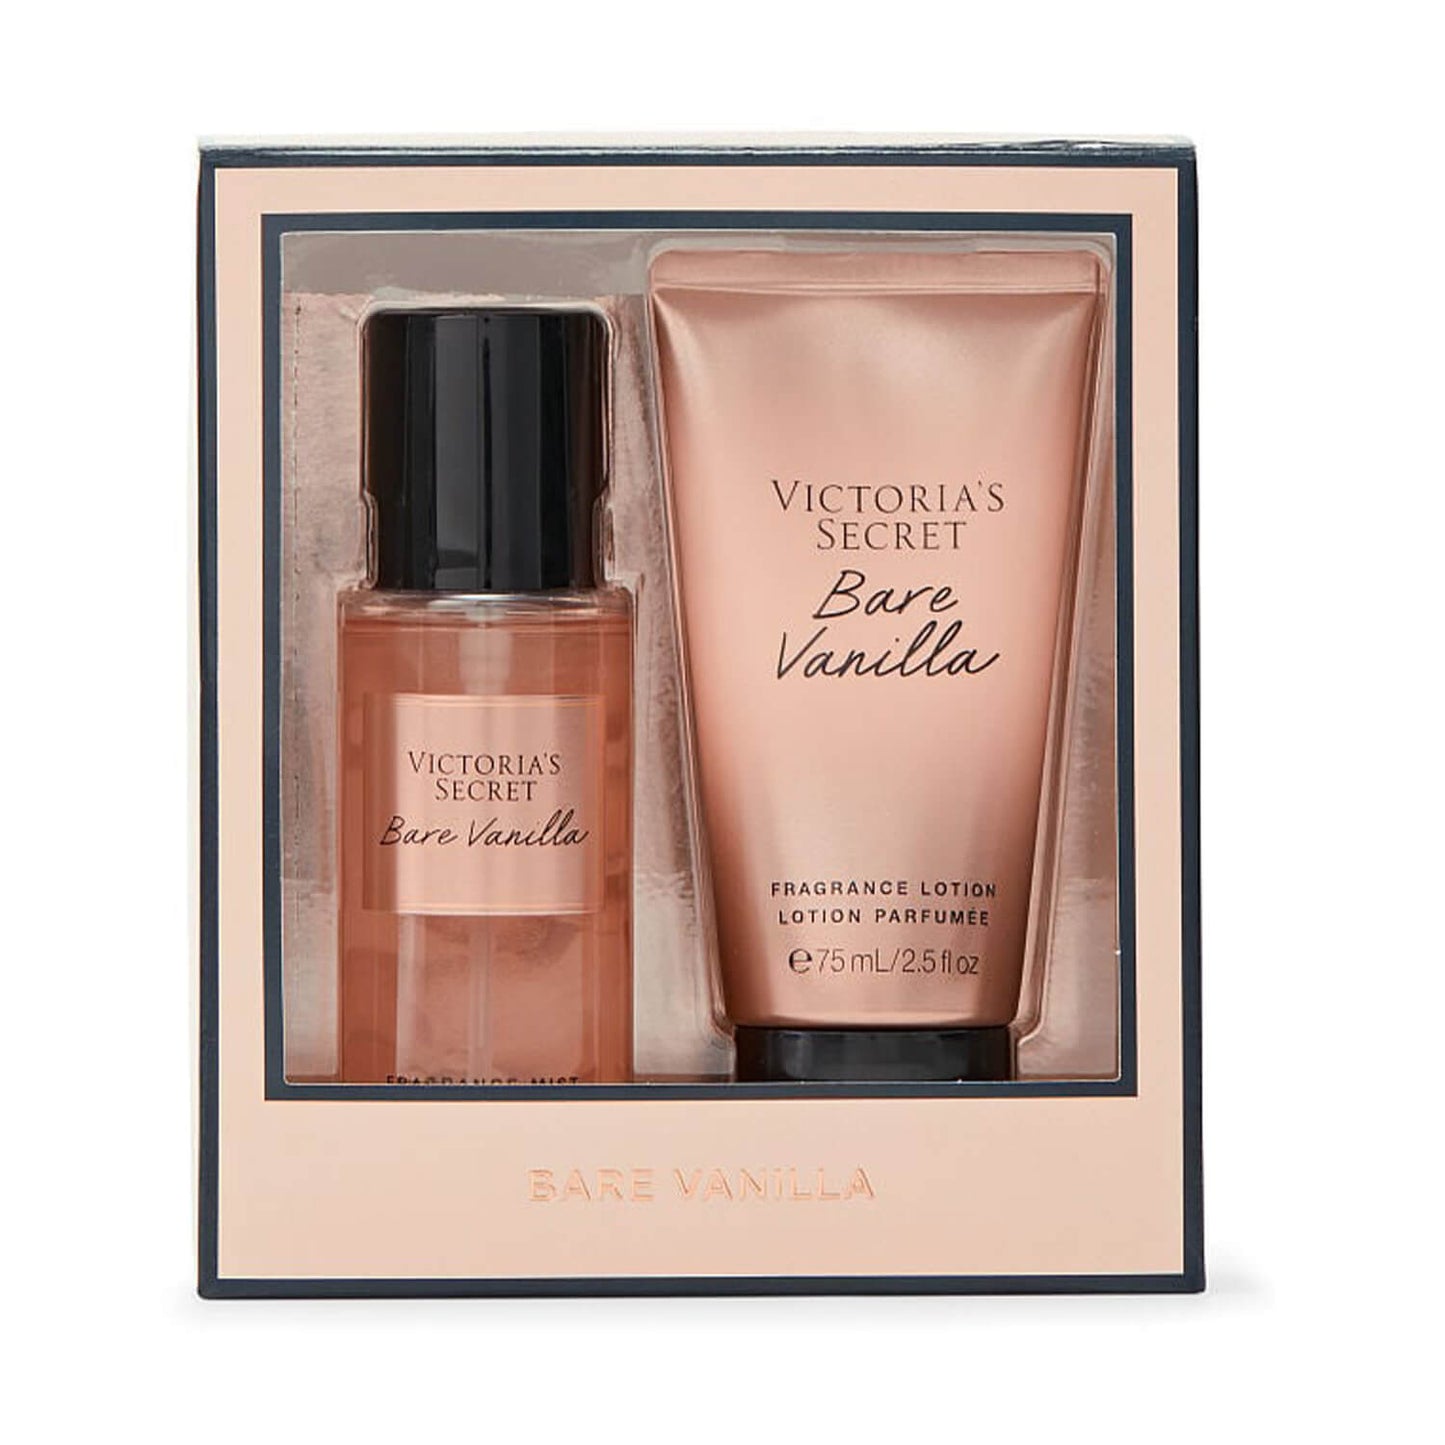 shop Victoria's Secret mist and lotion mini bare vanilla set available at Heygirl.pk for delivery in Pakistan